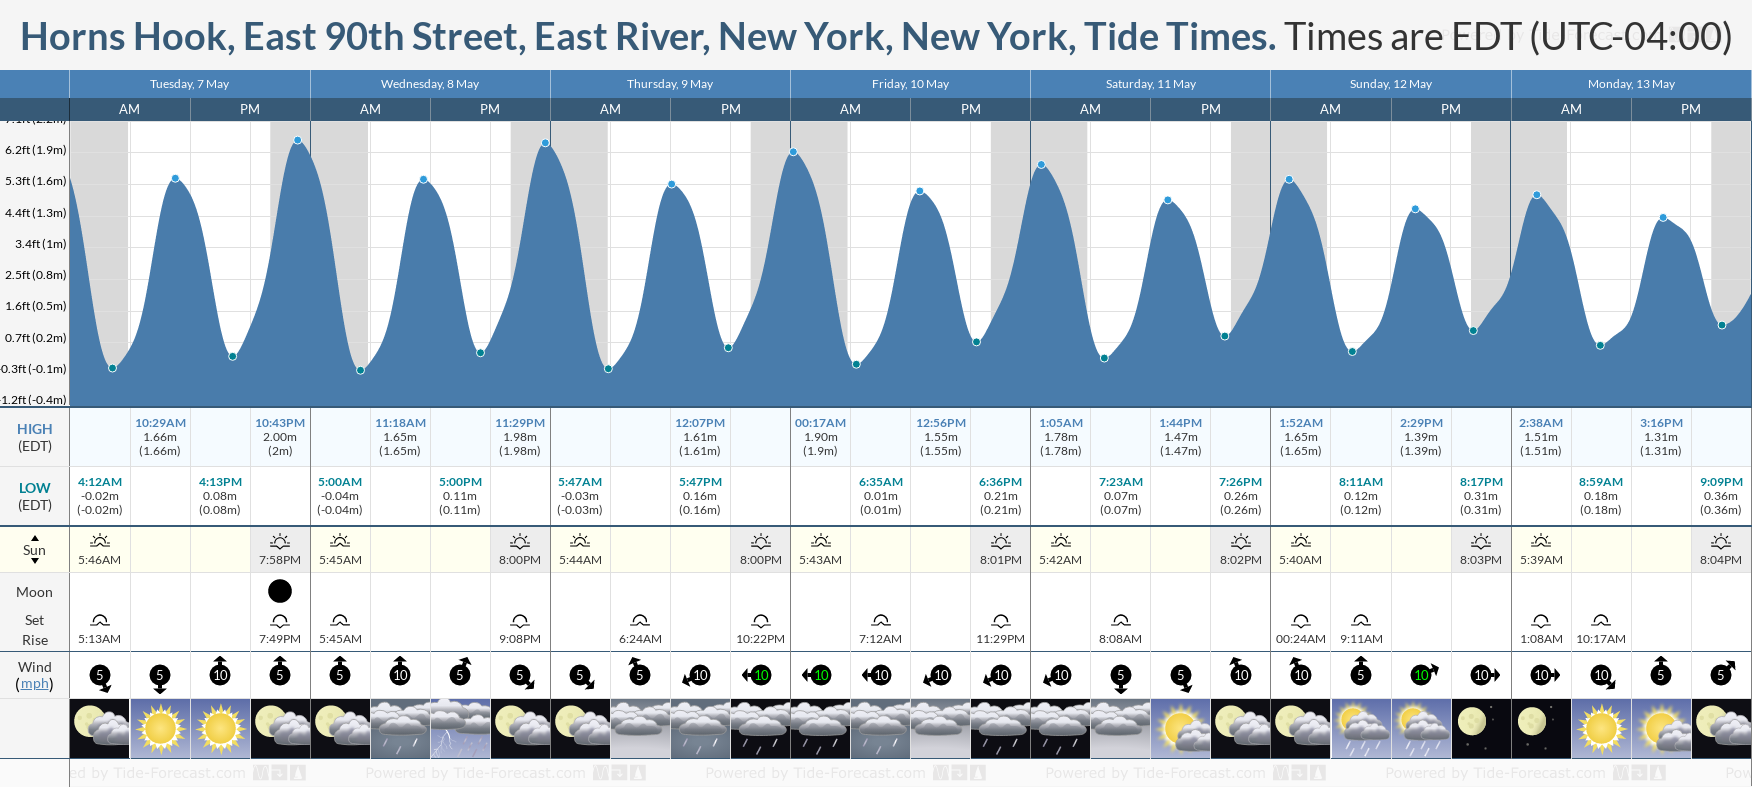 Horns Hook, East 90th Street, East River, New York, New York Tide Chart including high and low tide times for the next 7 days